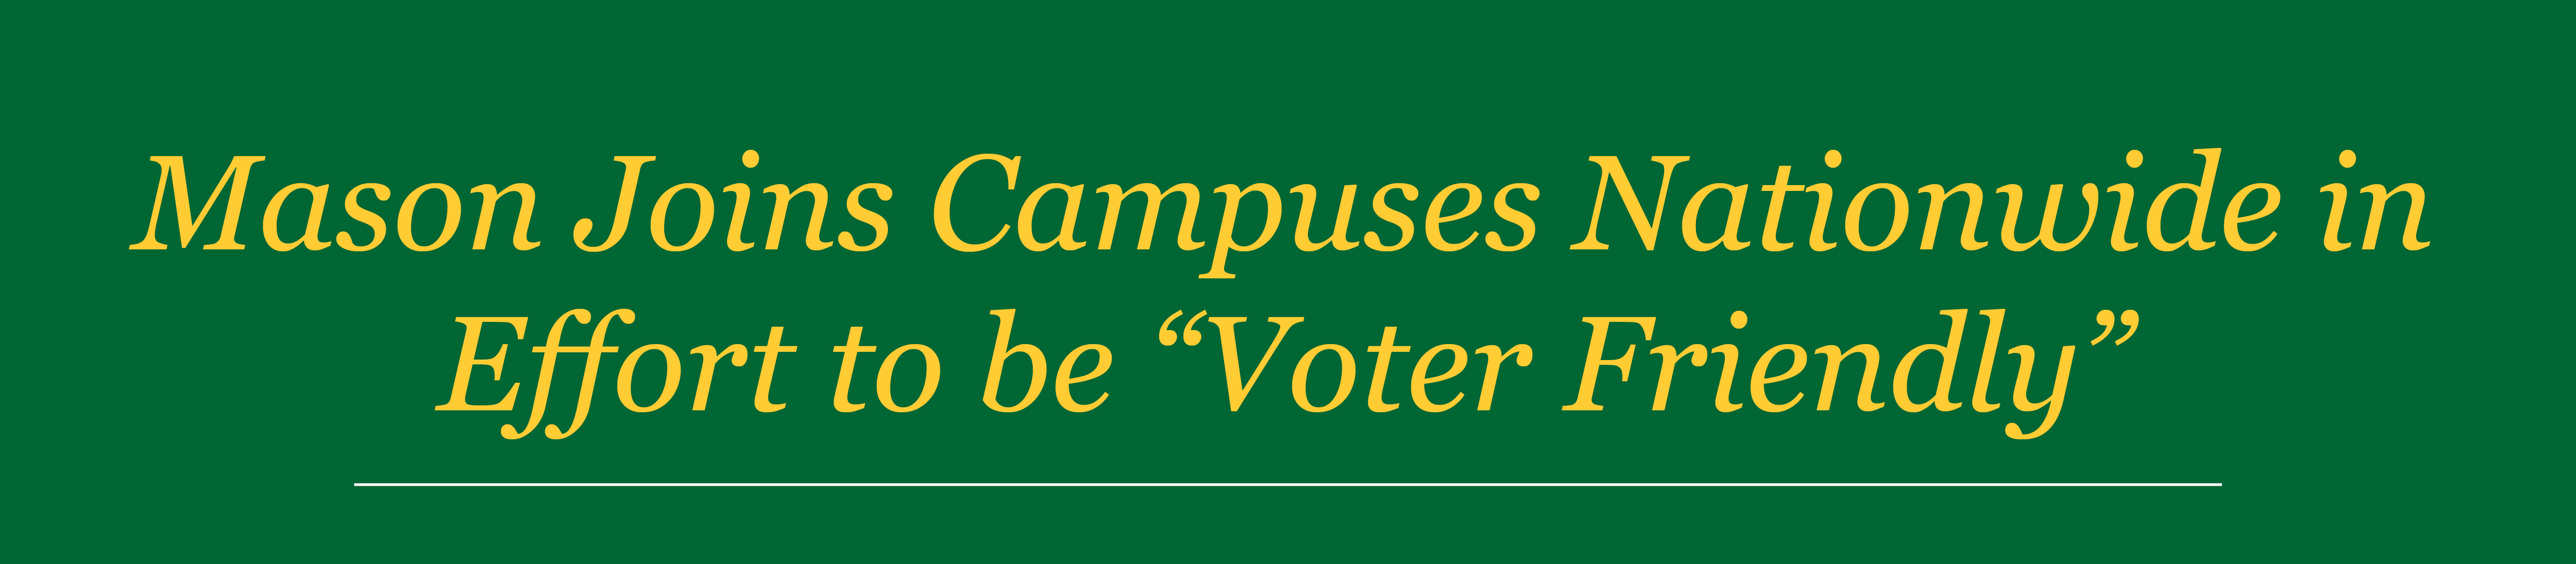 Mason Joins Campuses Nationwide in Effort To Be Voter Friendly